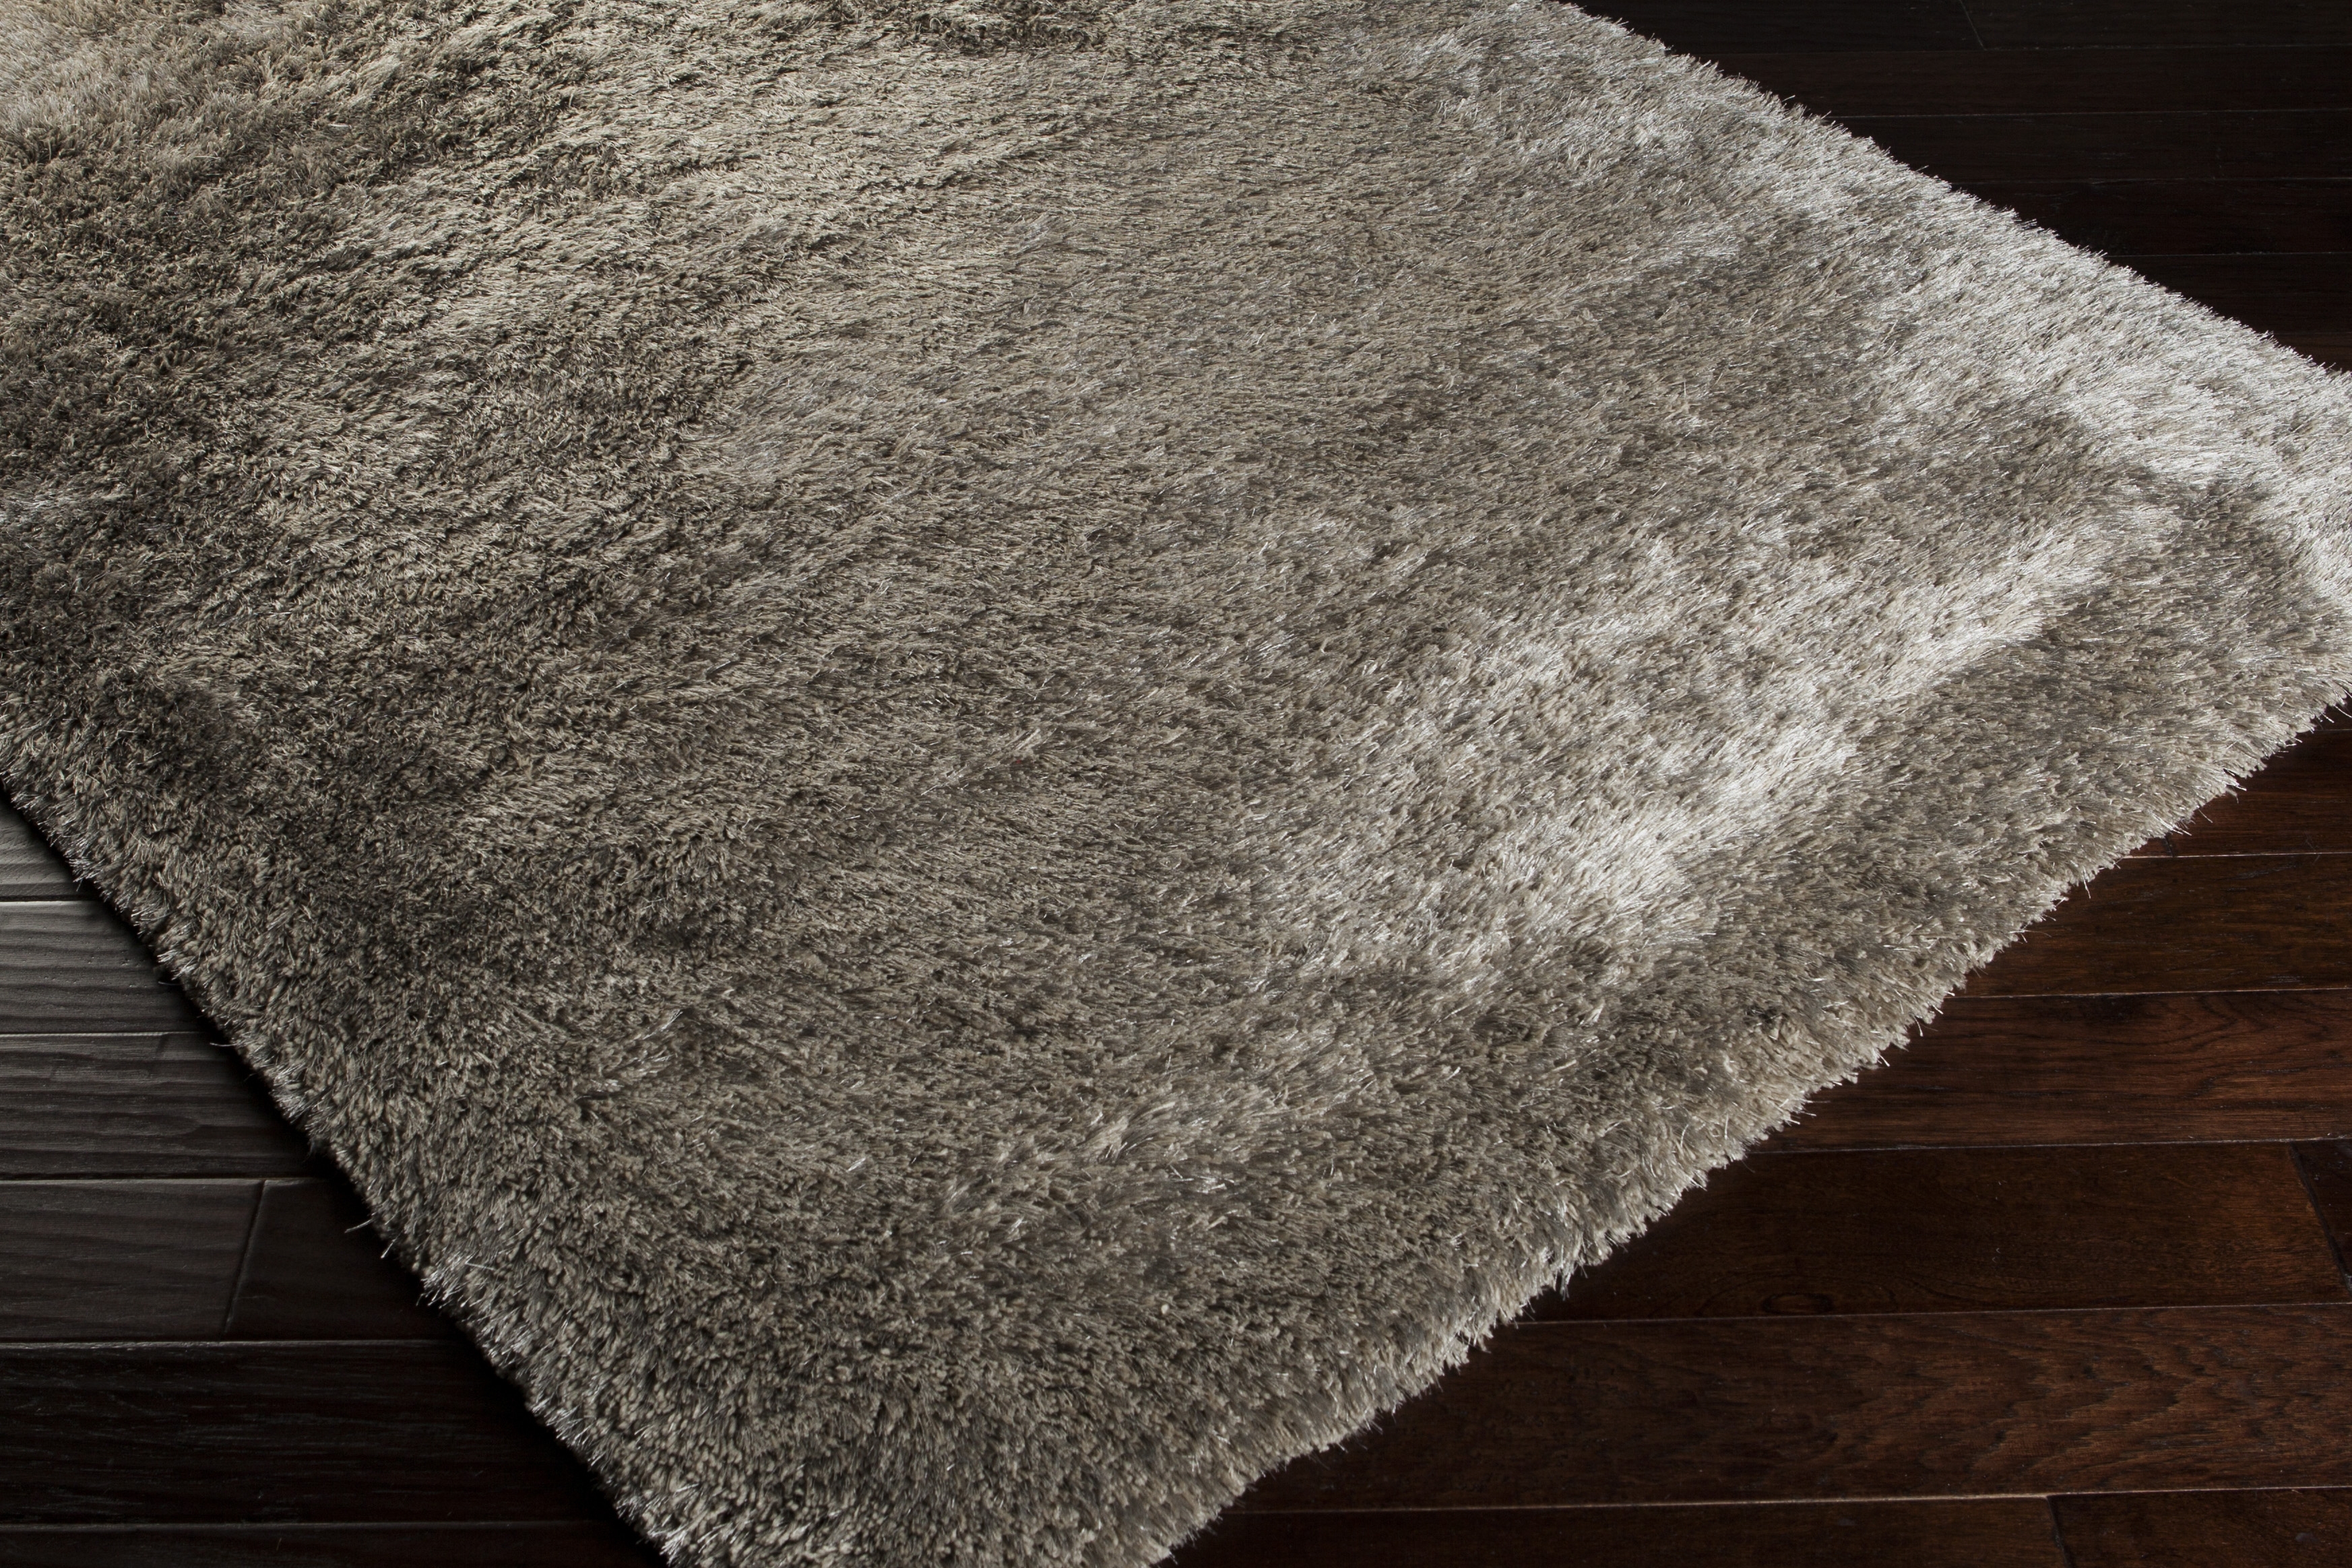 Grizzly Rug, 2' x 3' - Image 3